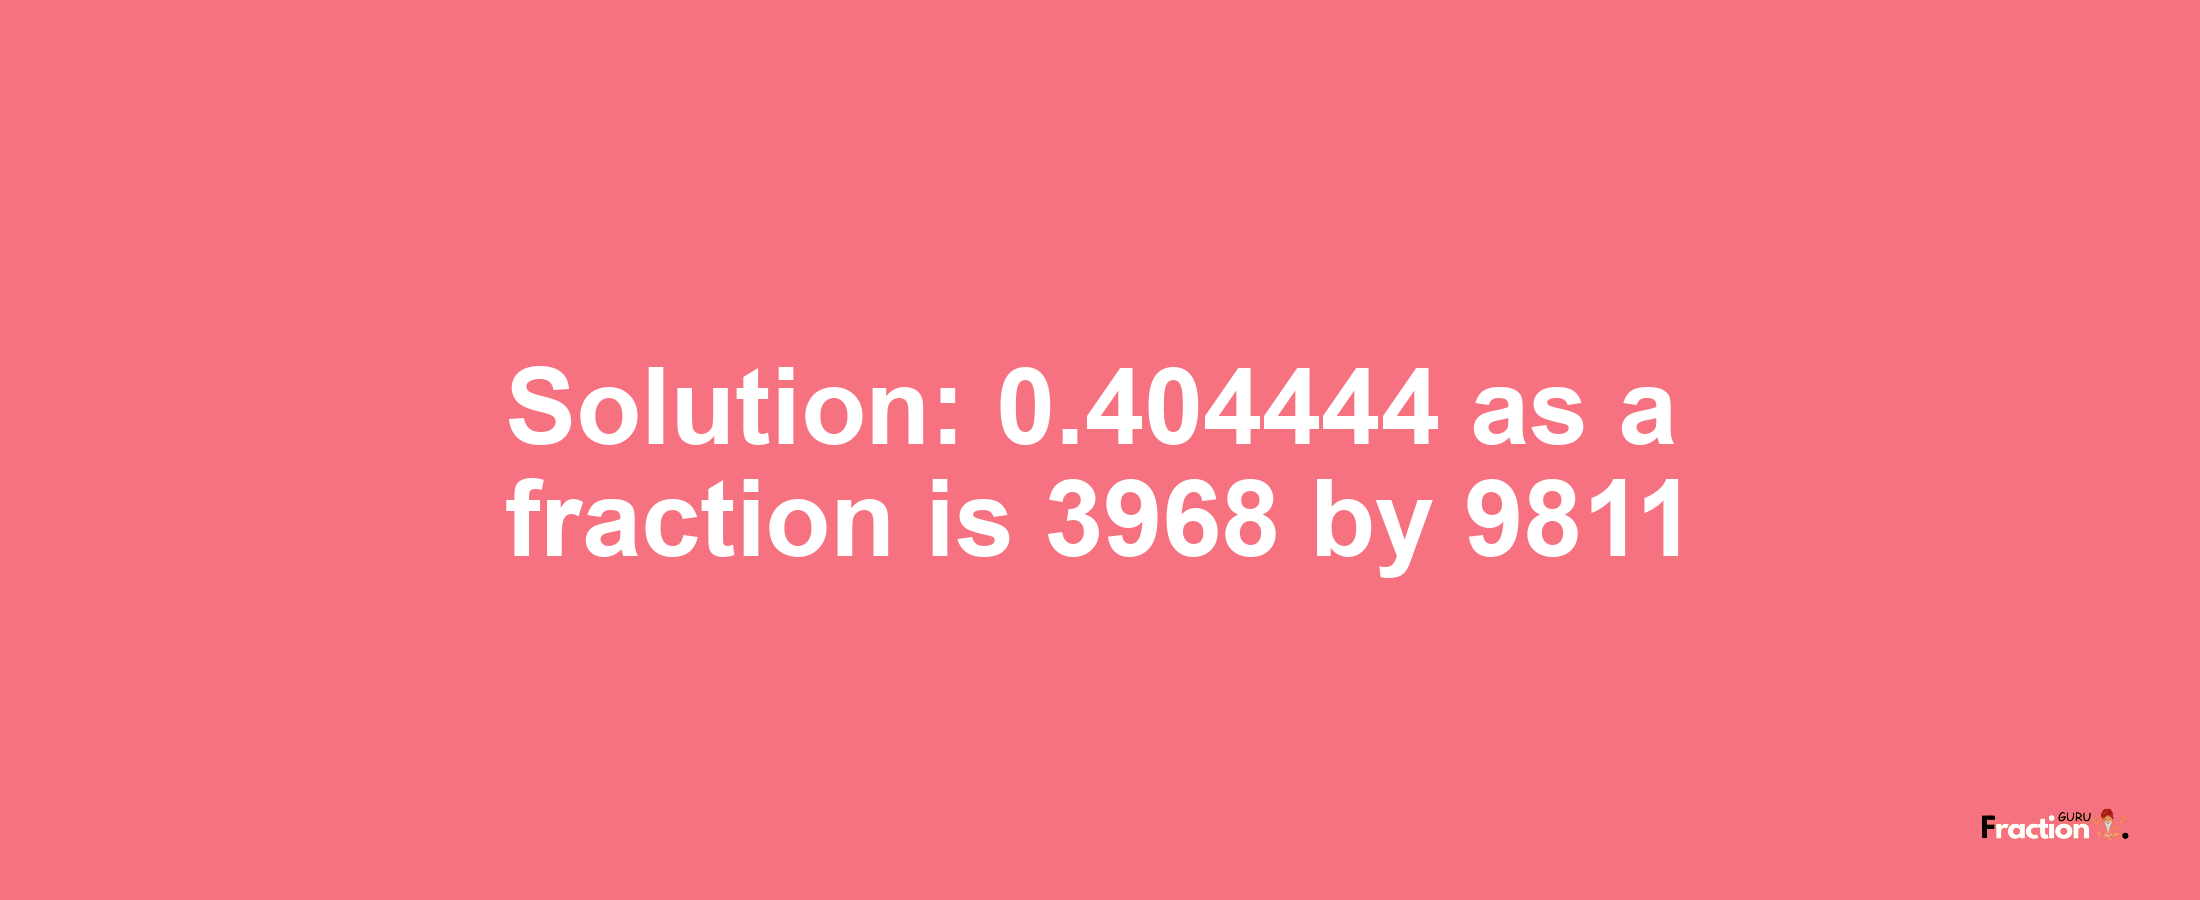 Solution:0.404444 as a fraction is 3968/9811